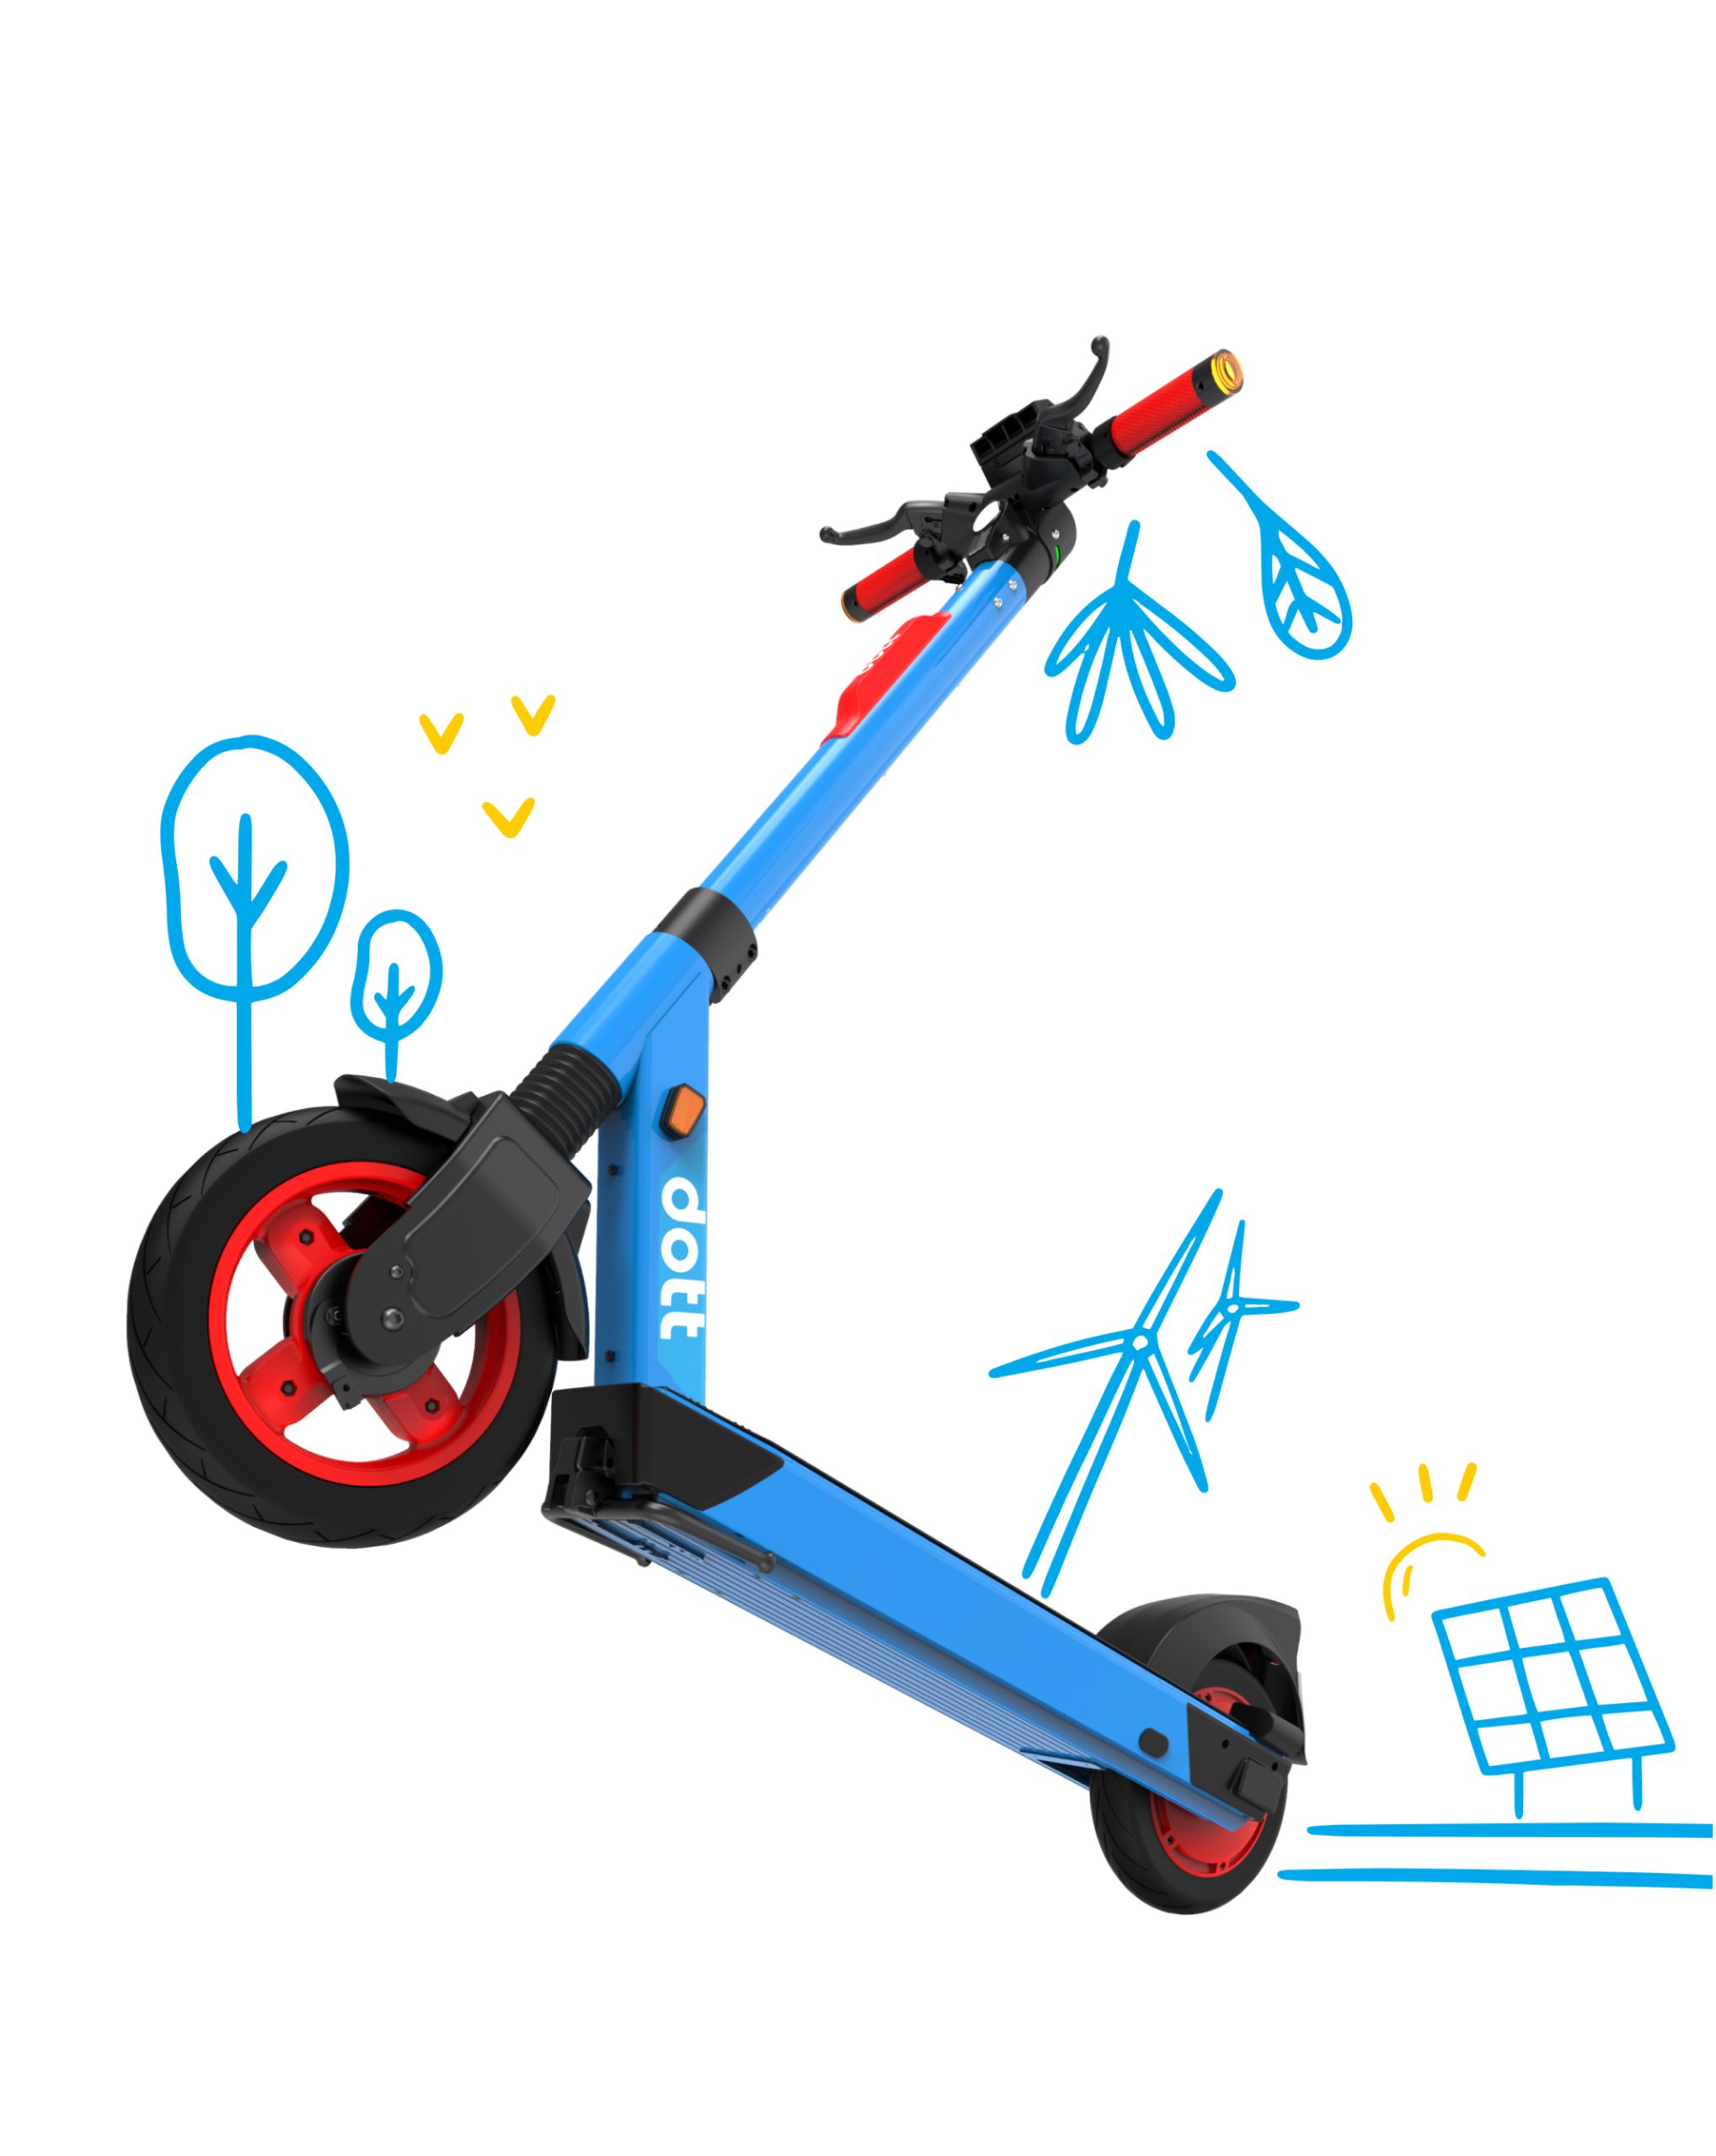 An image of a blue Dott e-scooter, decorated with illustrated windmills, solar panels, and trees.